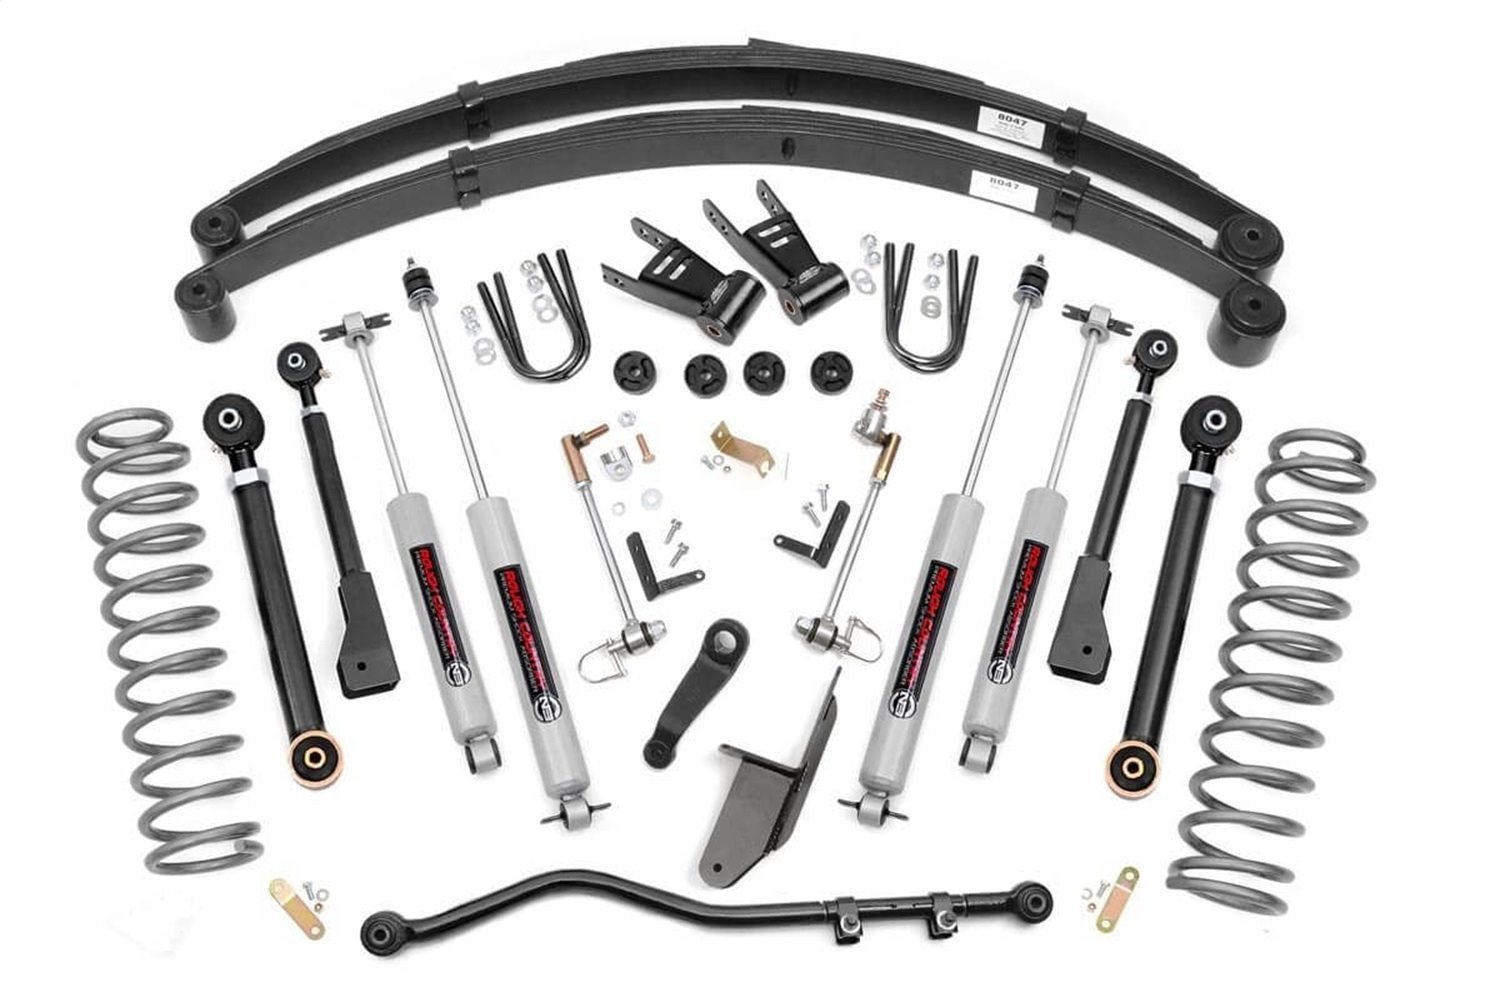 69620 6.5-inch X-Series Suspension Lift System